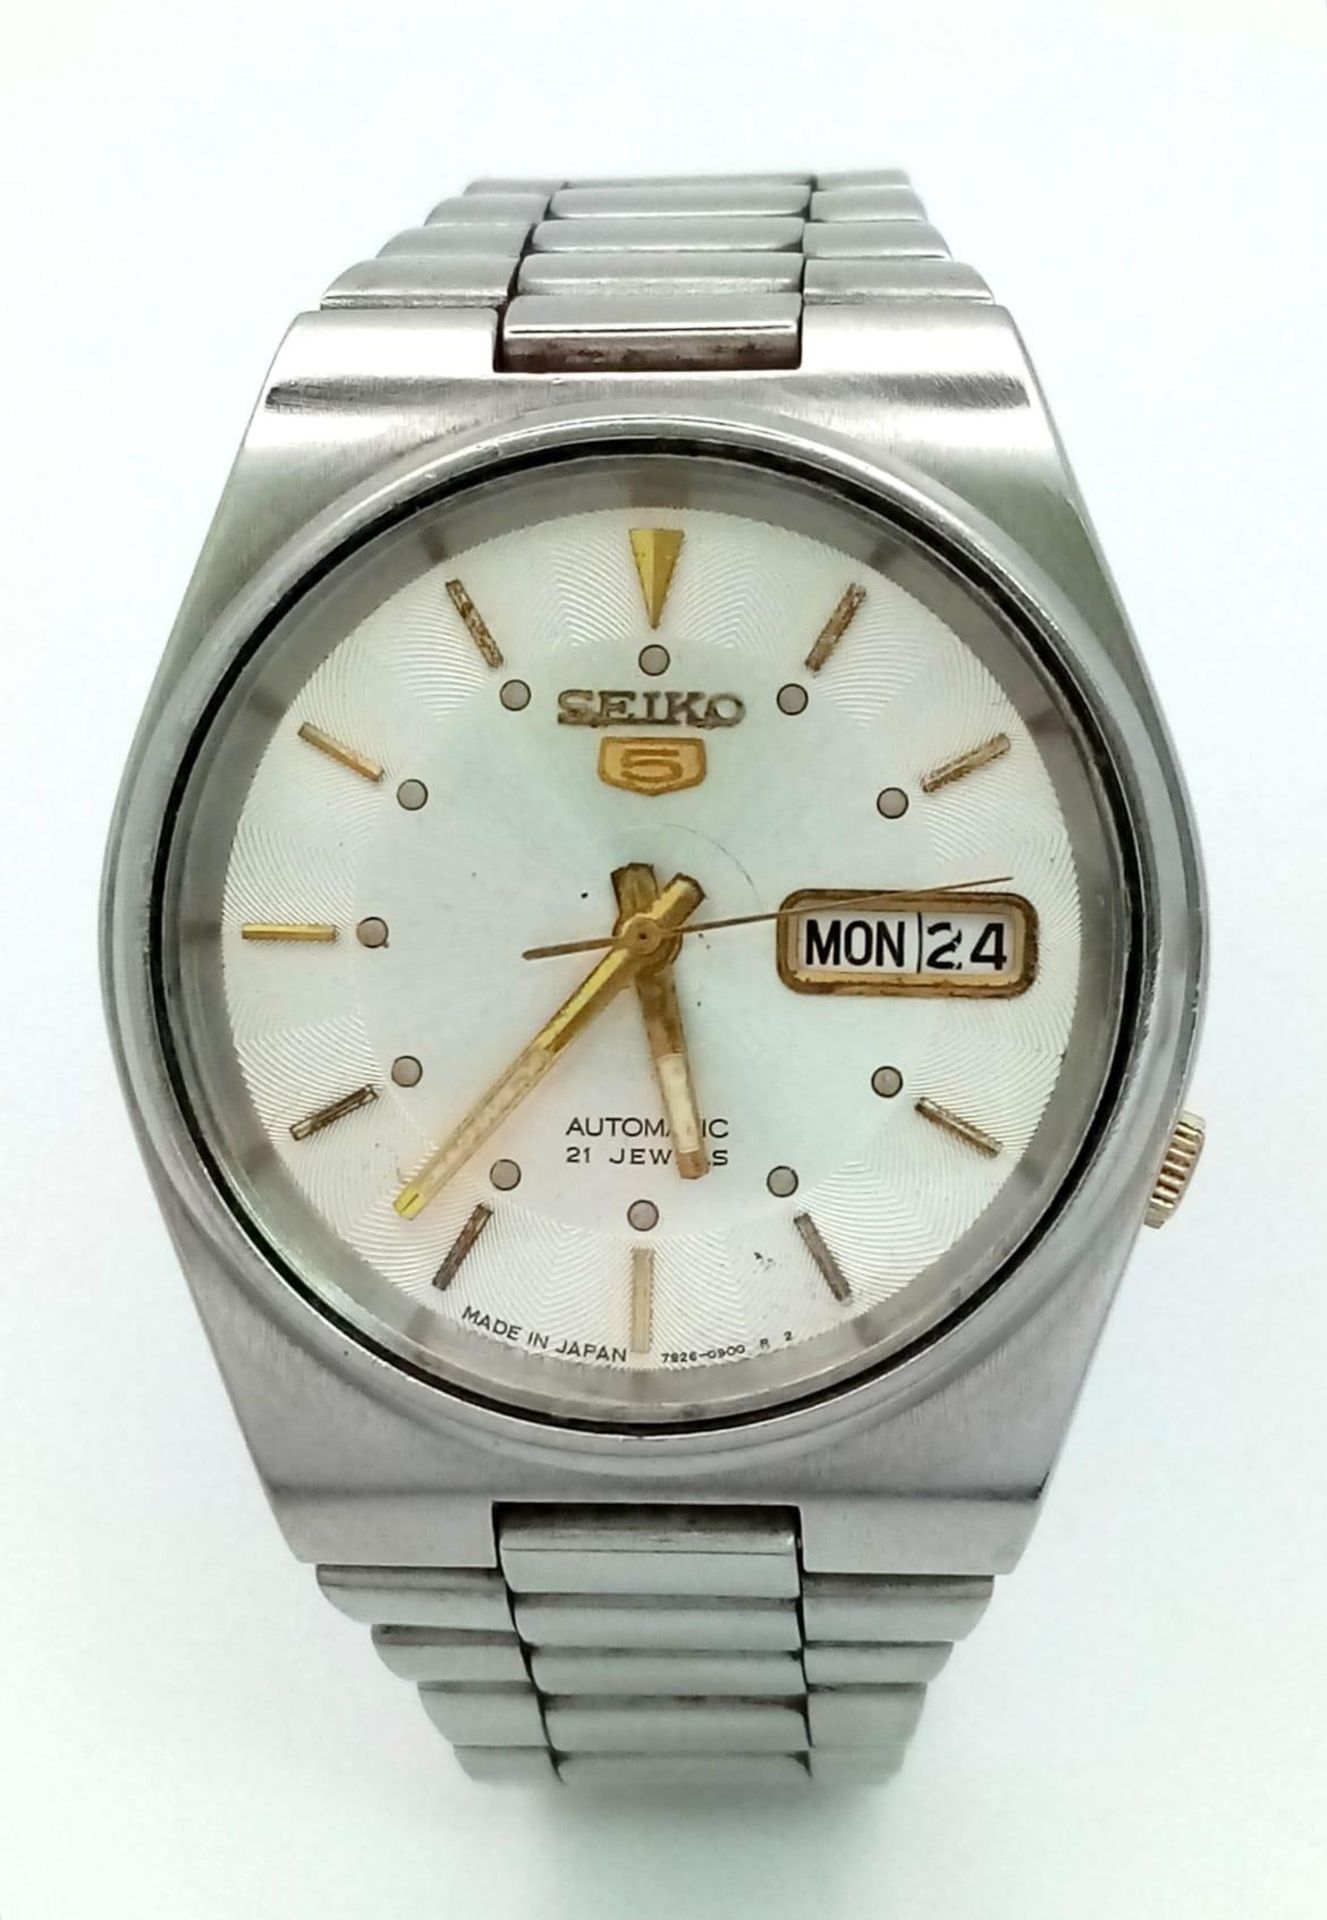 A Vintage Seiko 5 Automatic Gents Watch. Stainless steel strap and case - 36mm. Silver and white - Image 2 of 6